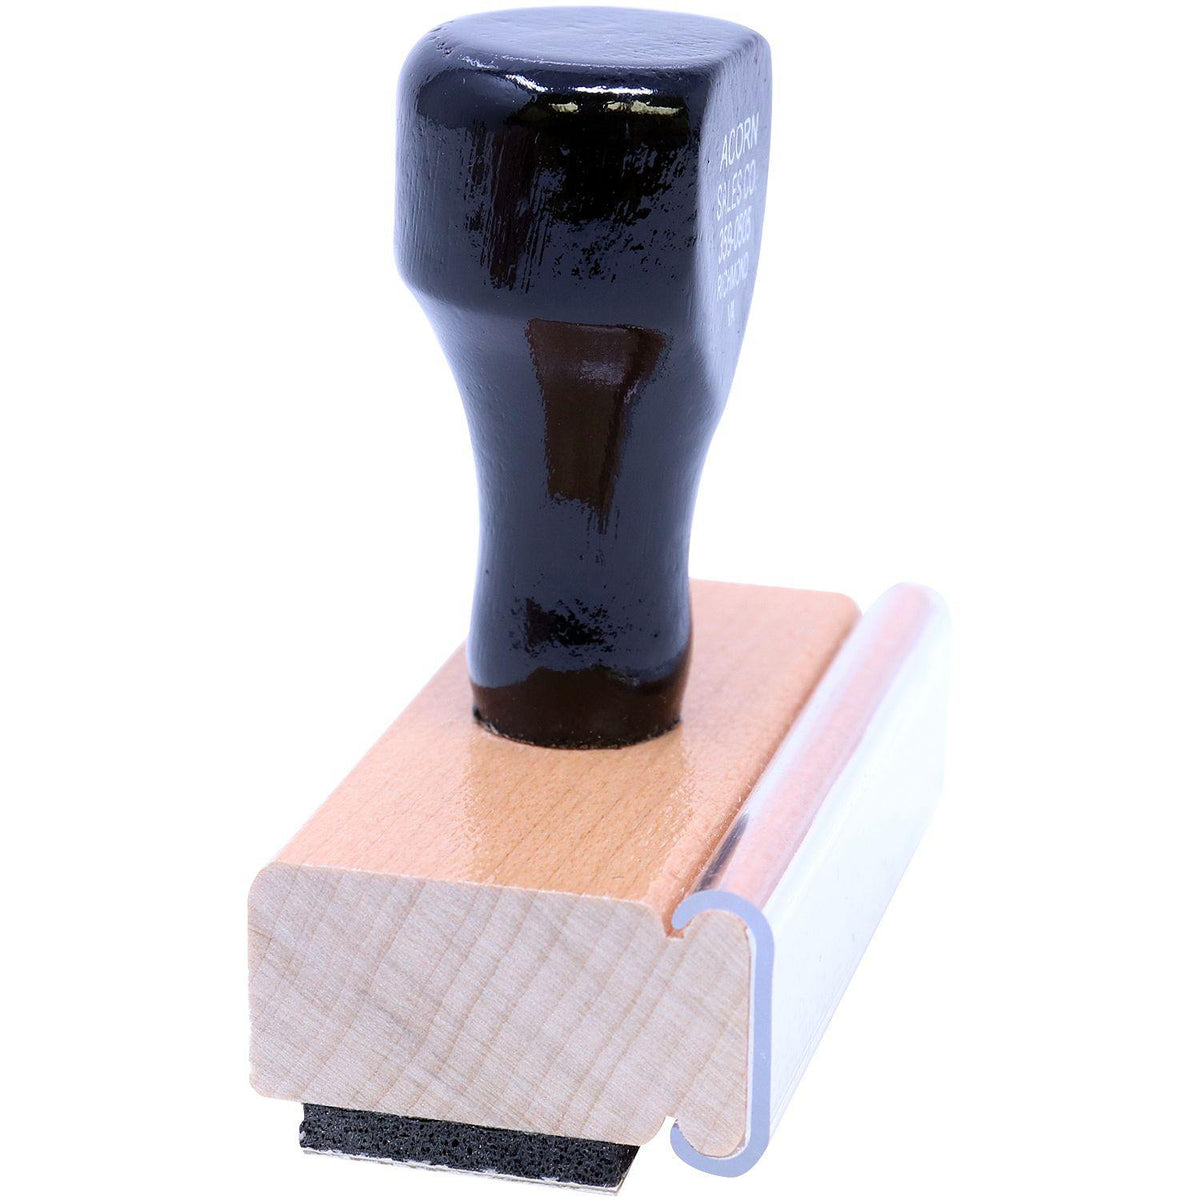 Side View of Large Official Rubber Stamp at an Angle